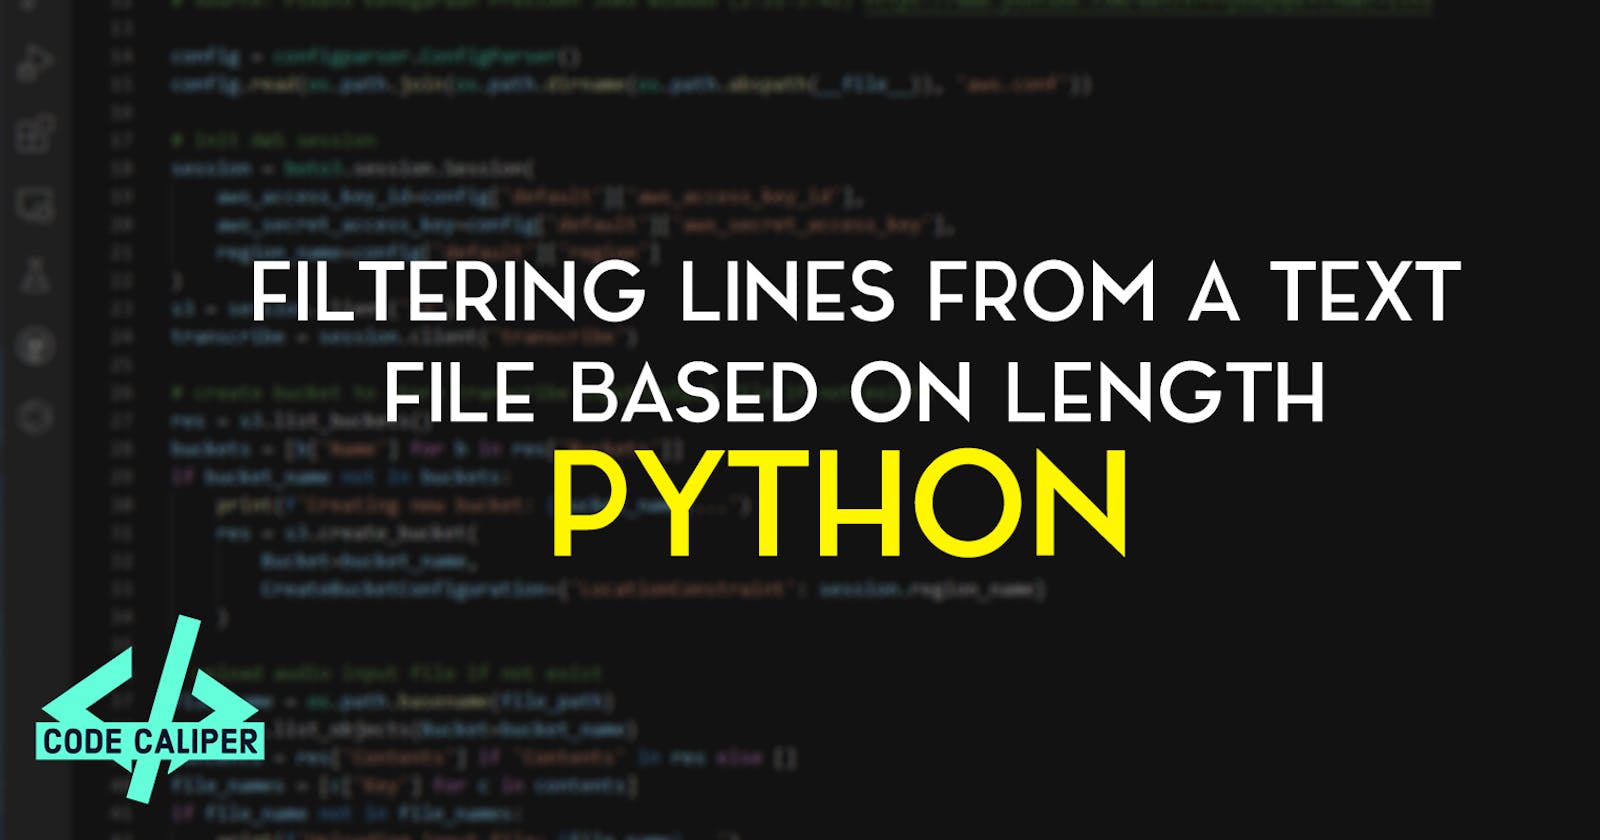 Filtering Lines from a Text File Based on Length using Python